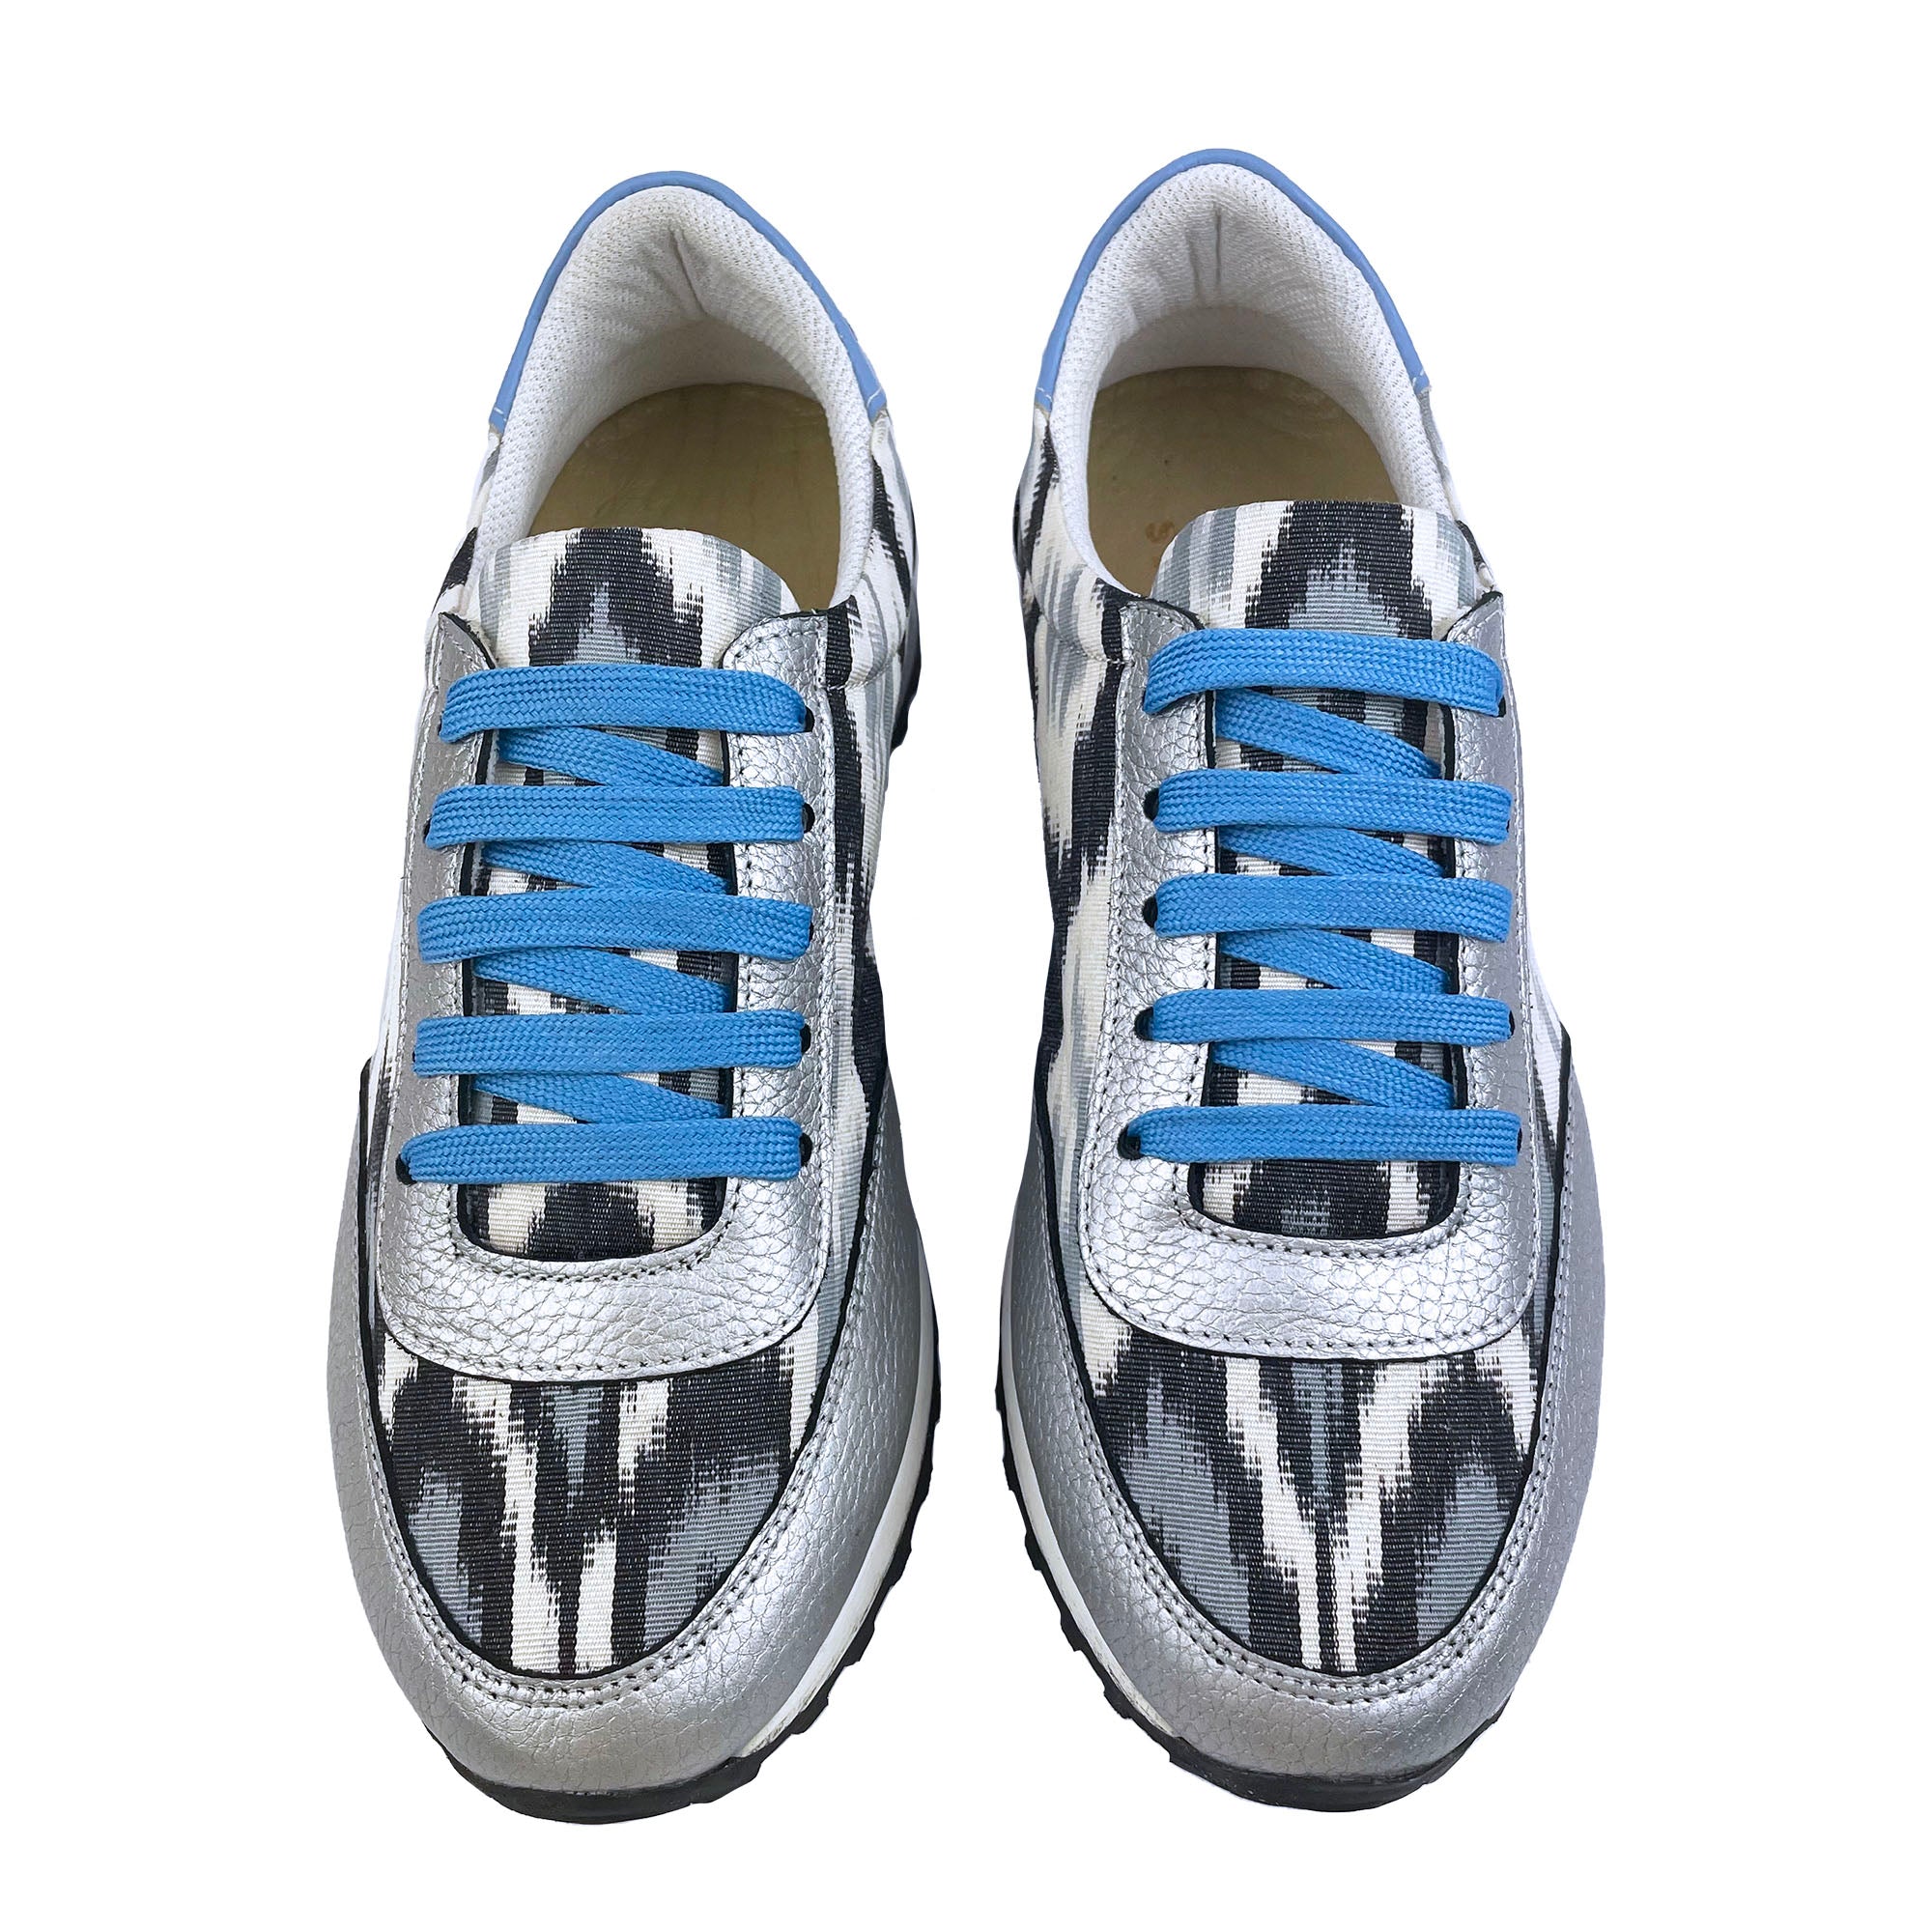 Black and white Ikat silk 'Mighty Morphin' trainers with silver leather and blue laces